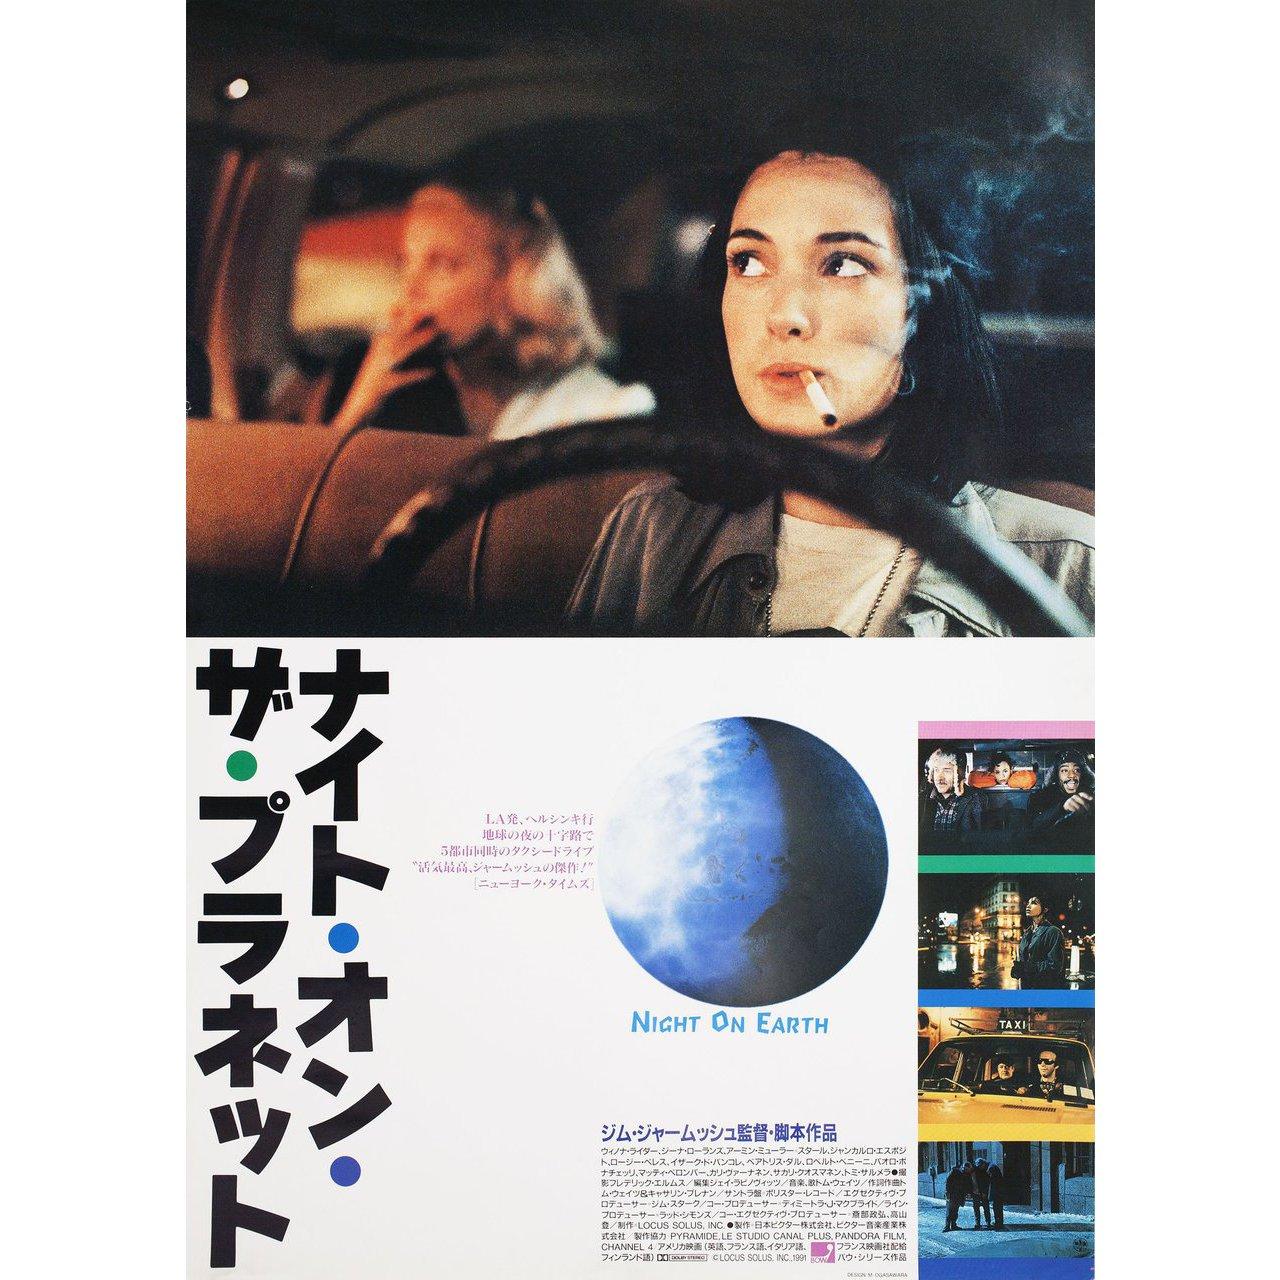 Original 1991 Japanese B2 poster for the film Night on Earth directed by Jim Jarmusch with Gena Rowlands / Winona Ryder / Lisanne Falk / Alan Randolph Scott. Very good-fine condition, rolled. Please note: the size is stated in inches and the actual